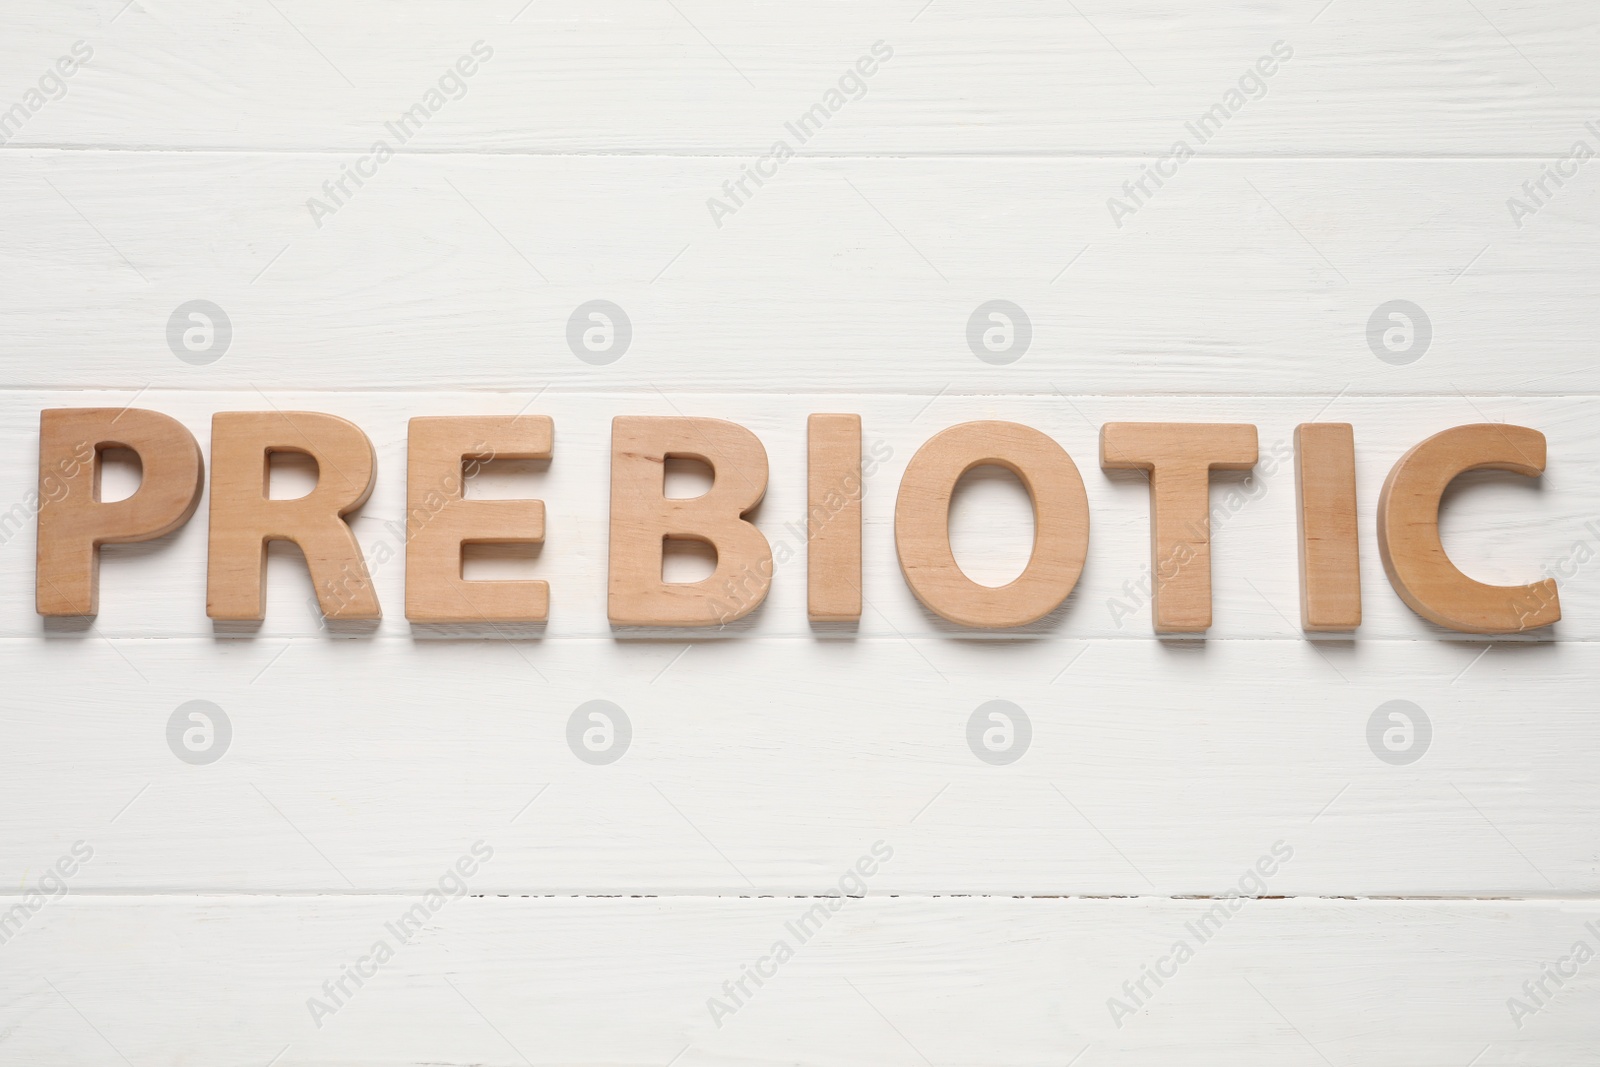 Photo of Word Prebiotic made of letters on white wooden table, top view